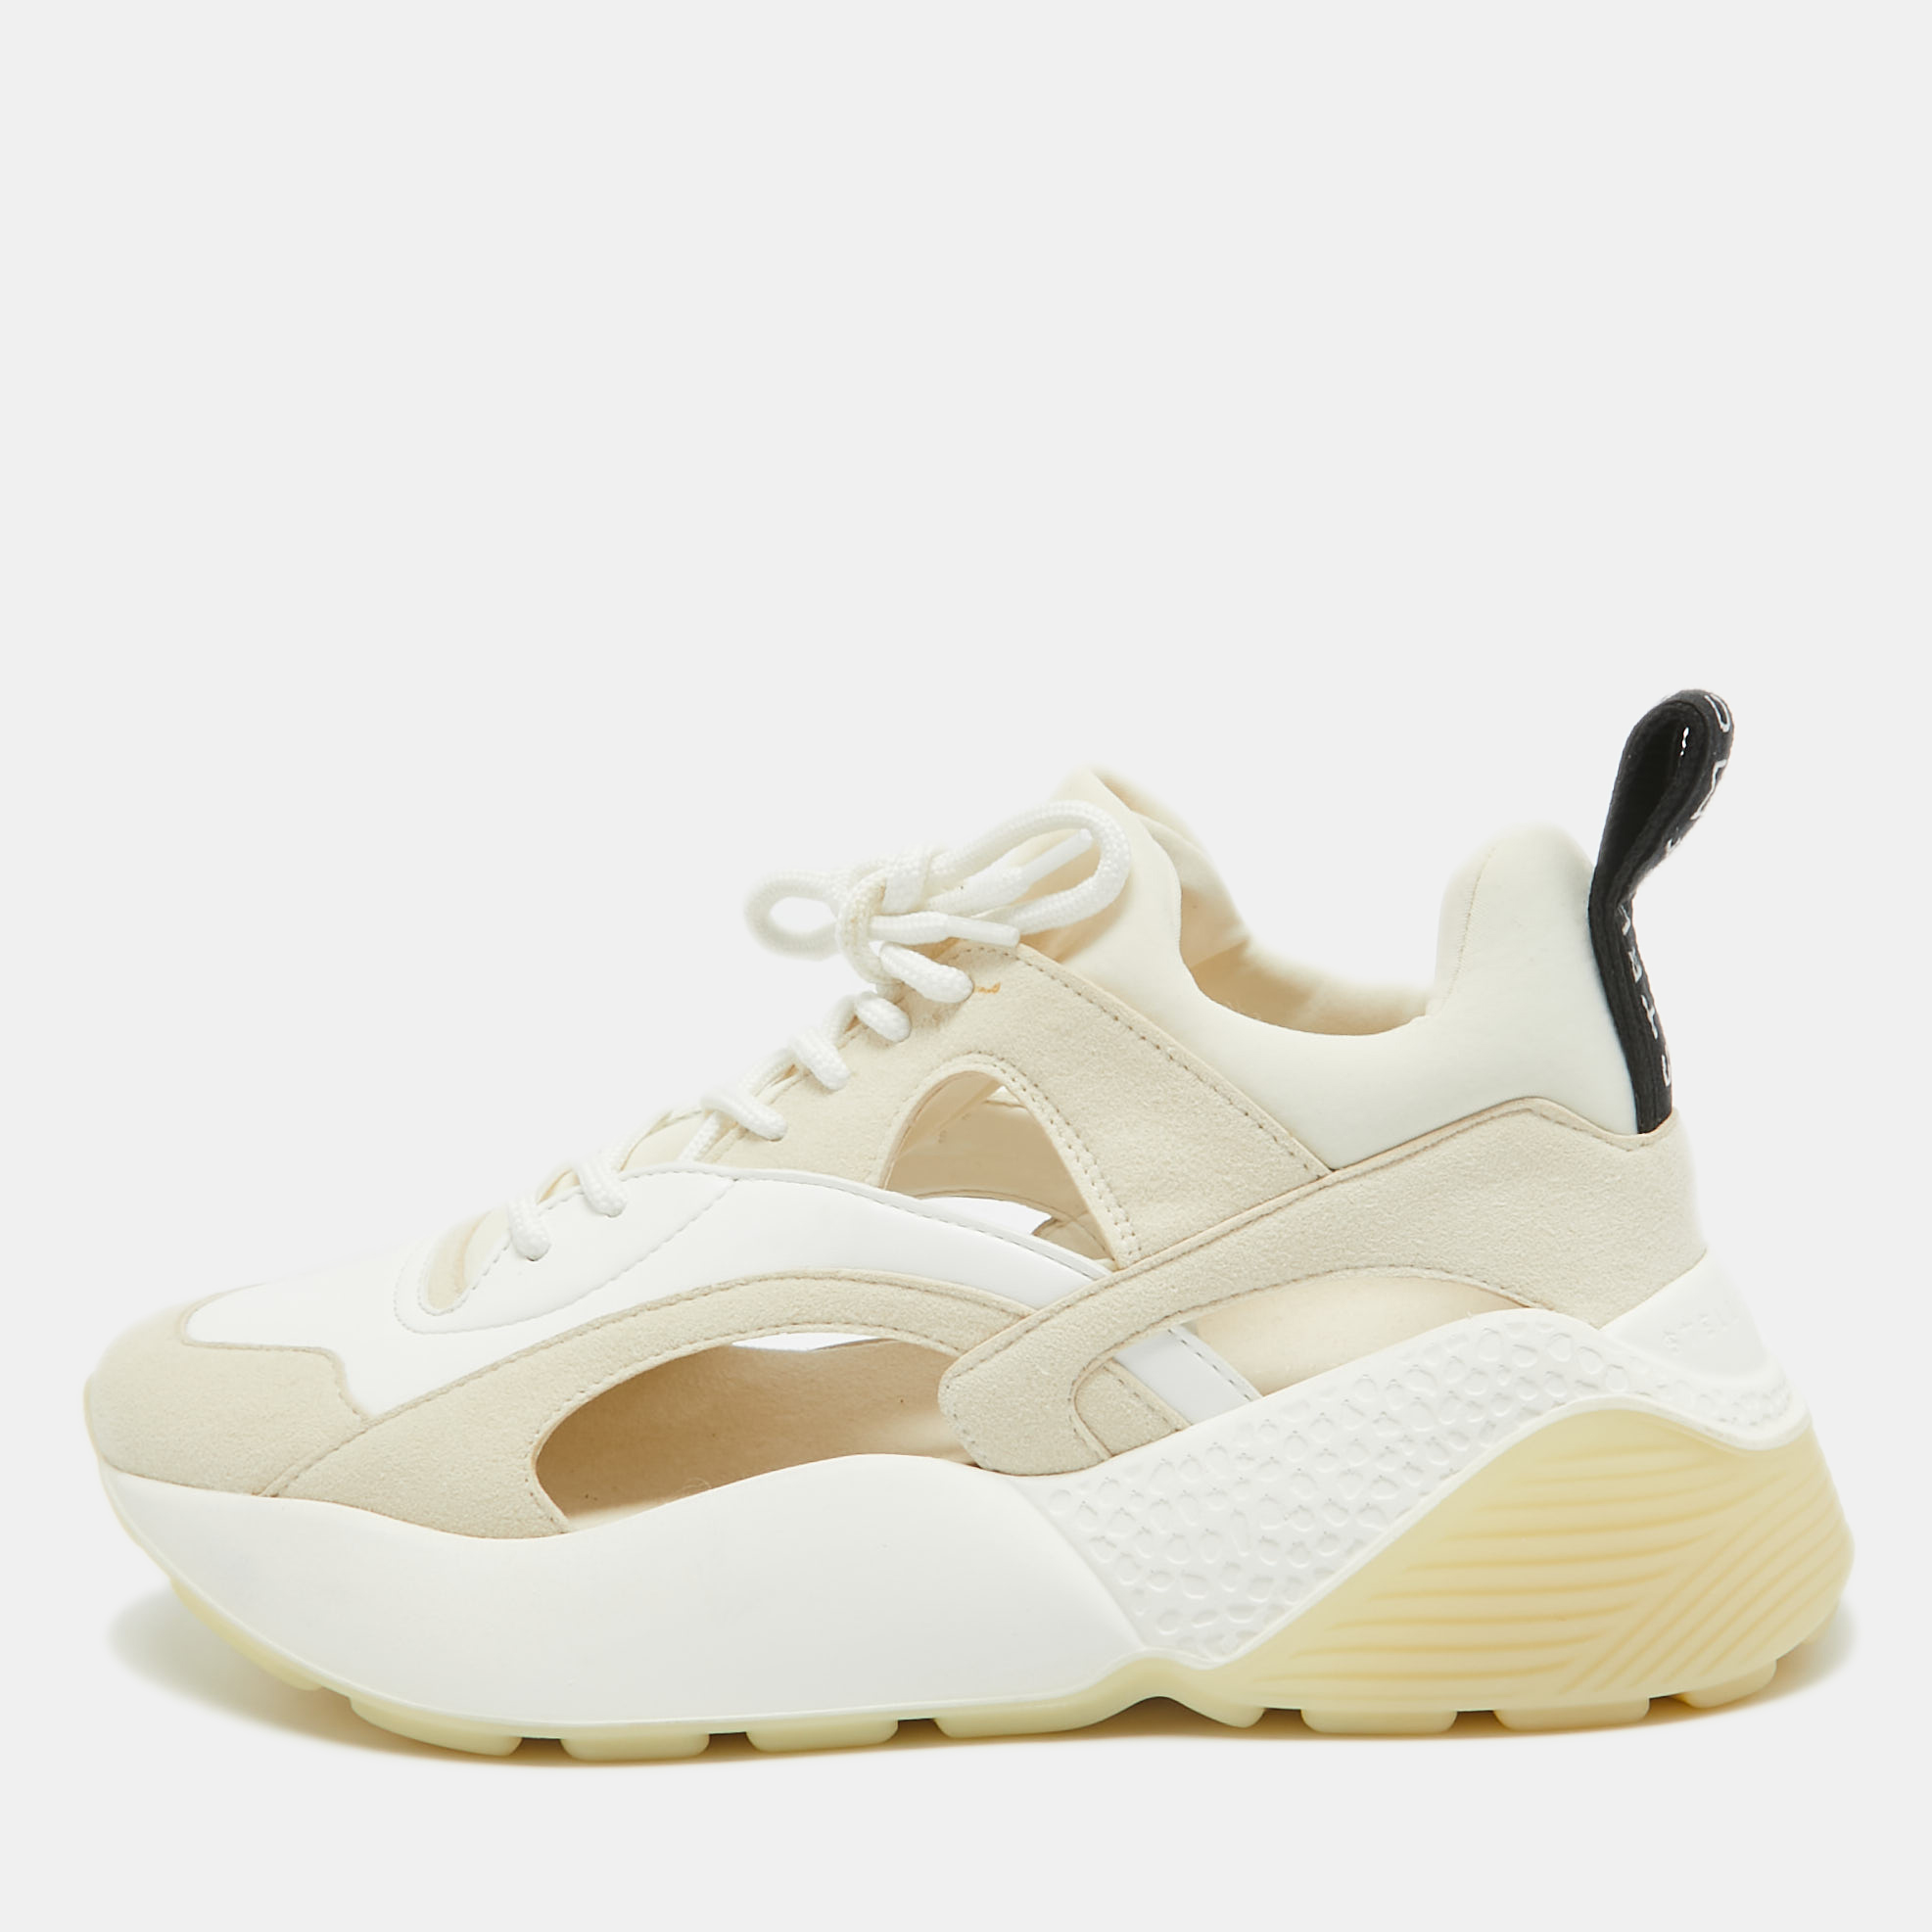 

Stella McCartney White/Cream Faux Leather and Suede Cut Out Eclypse Sneakers Size